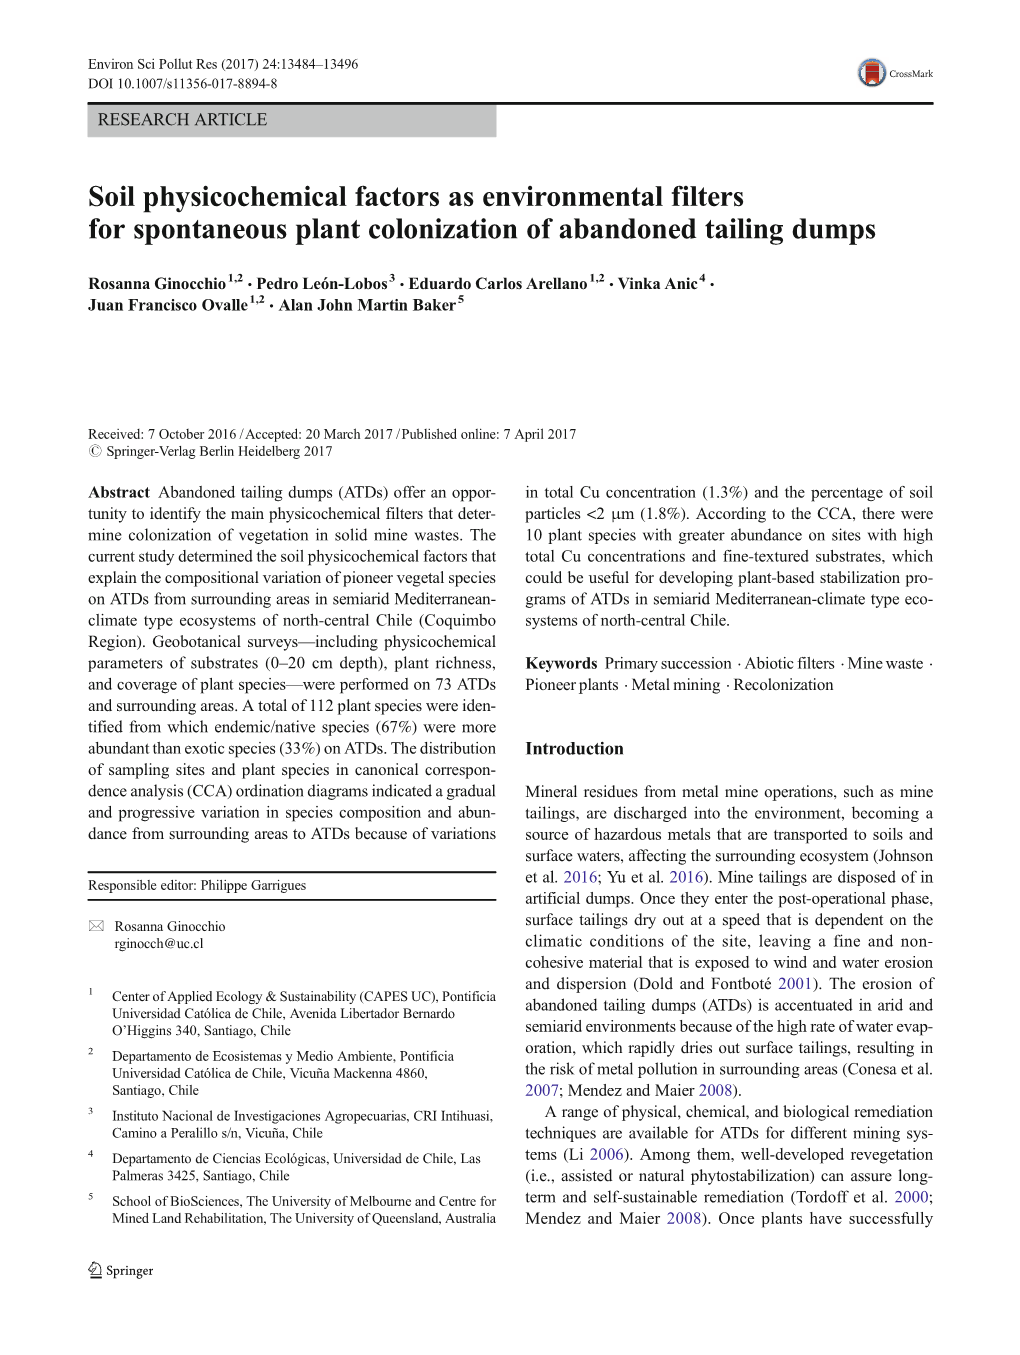 Soil Physicochemical Factors As Environmental Filters for Spontaneous Plant Colonization of Abandoned Tailing Dumps